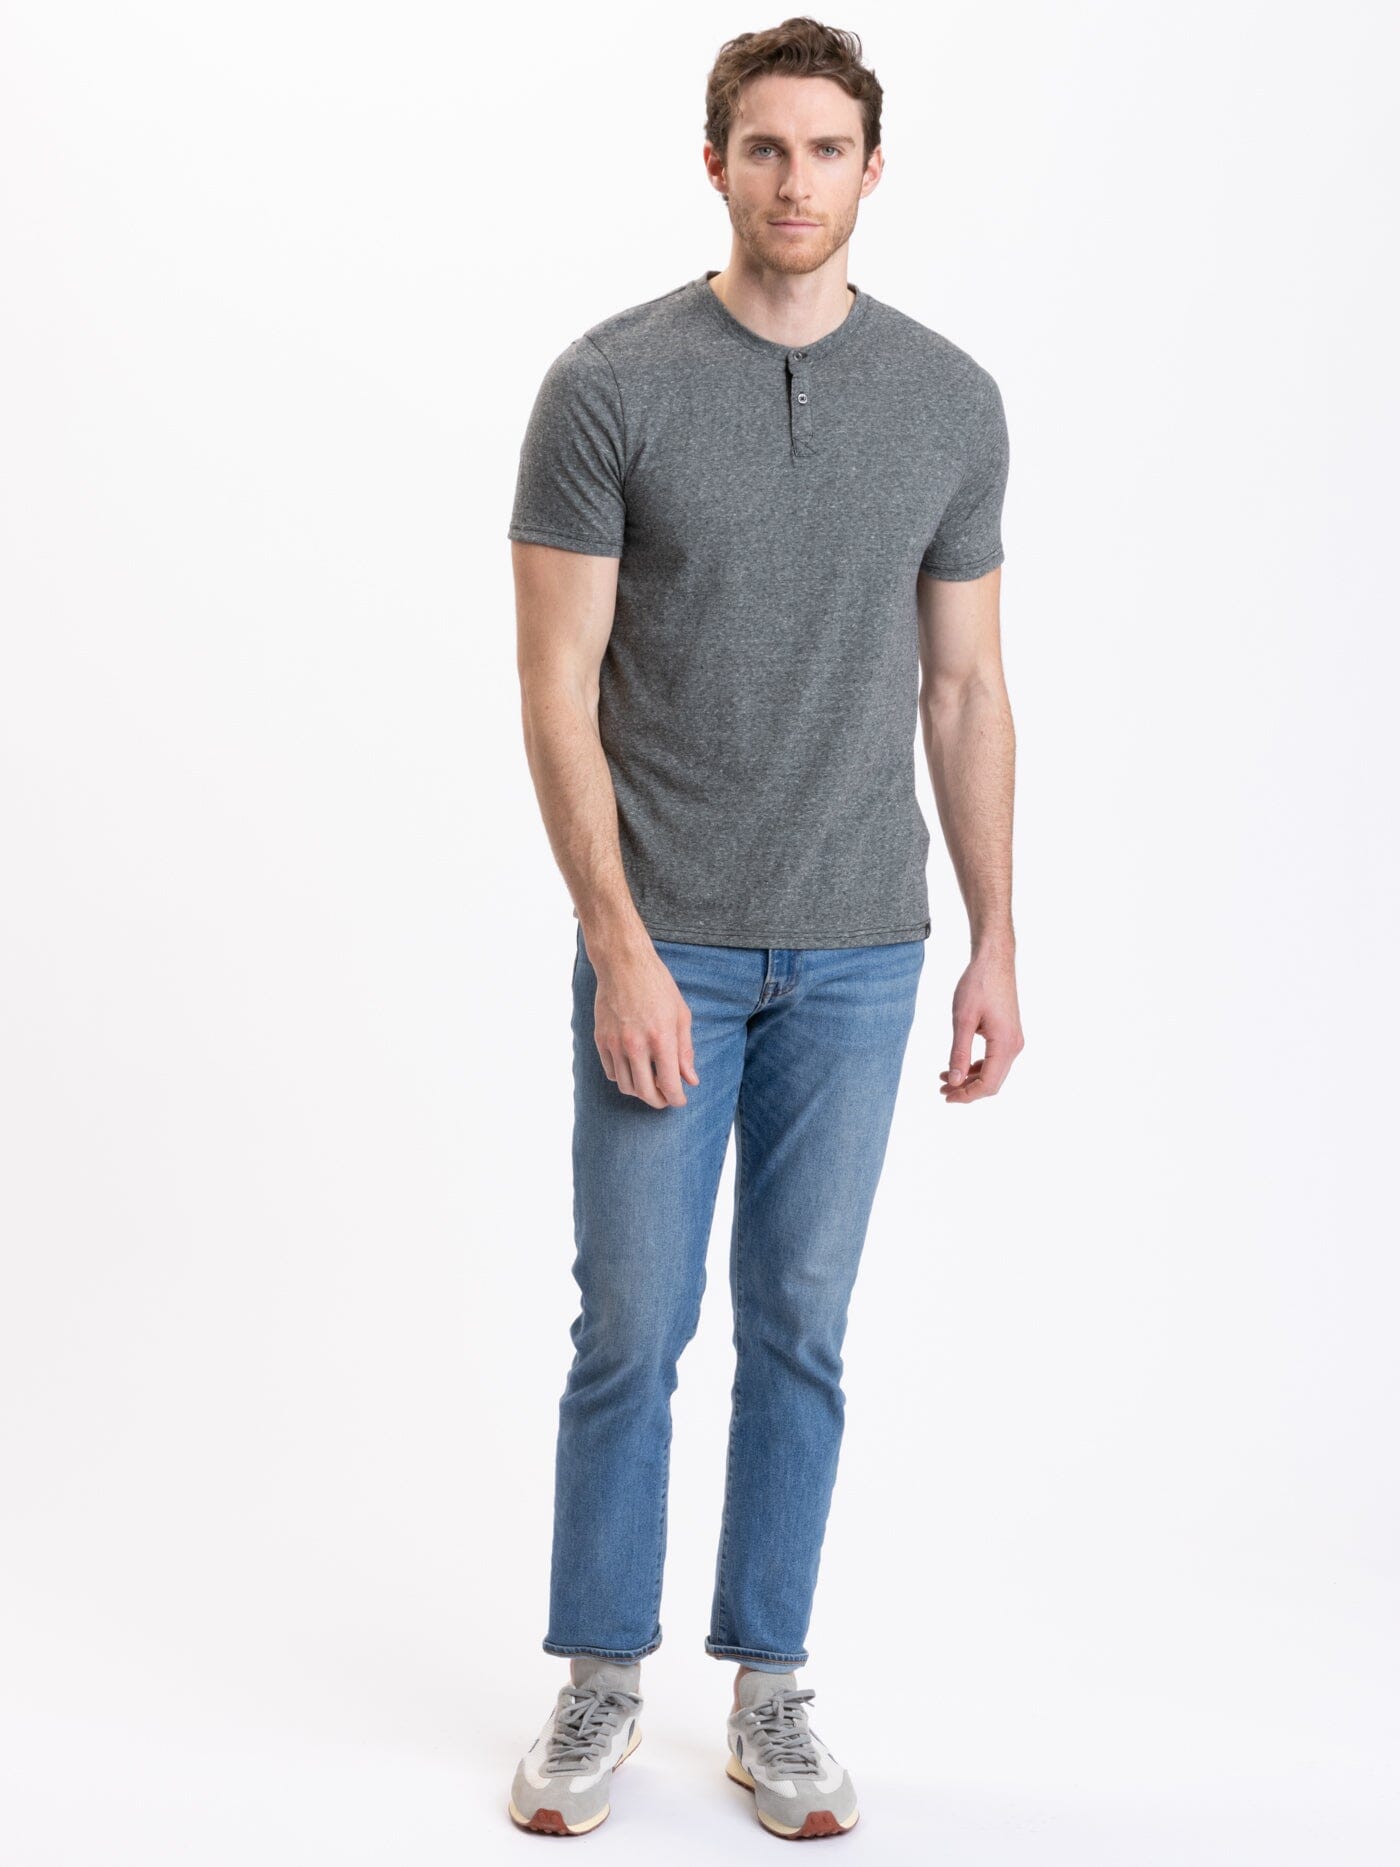 Men's Sale Tops – Threads 4 Thought